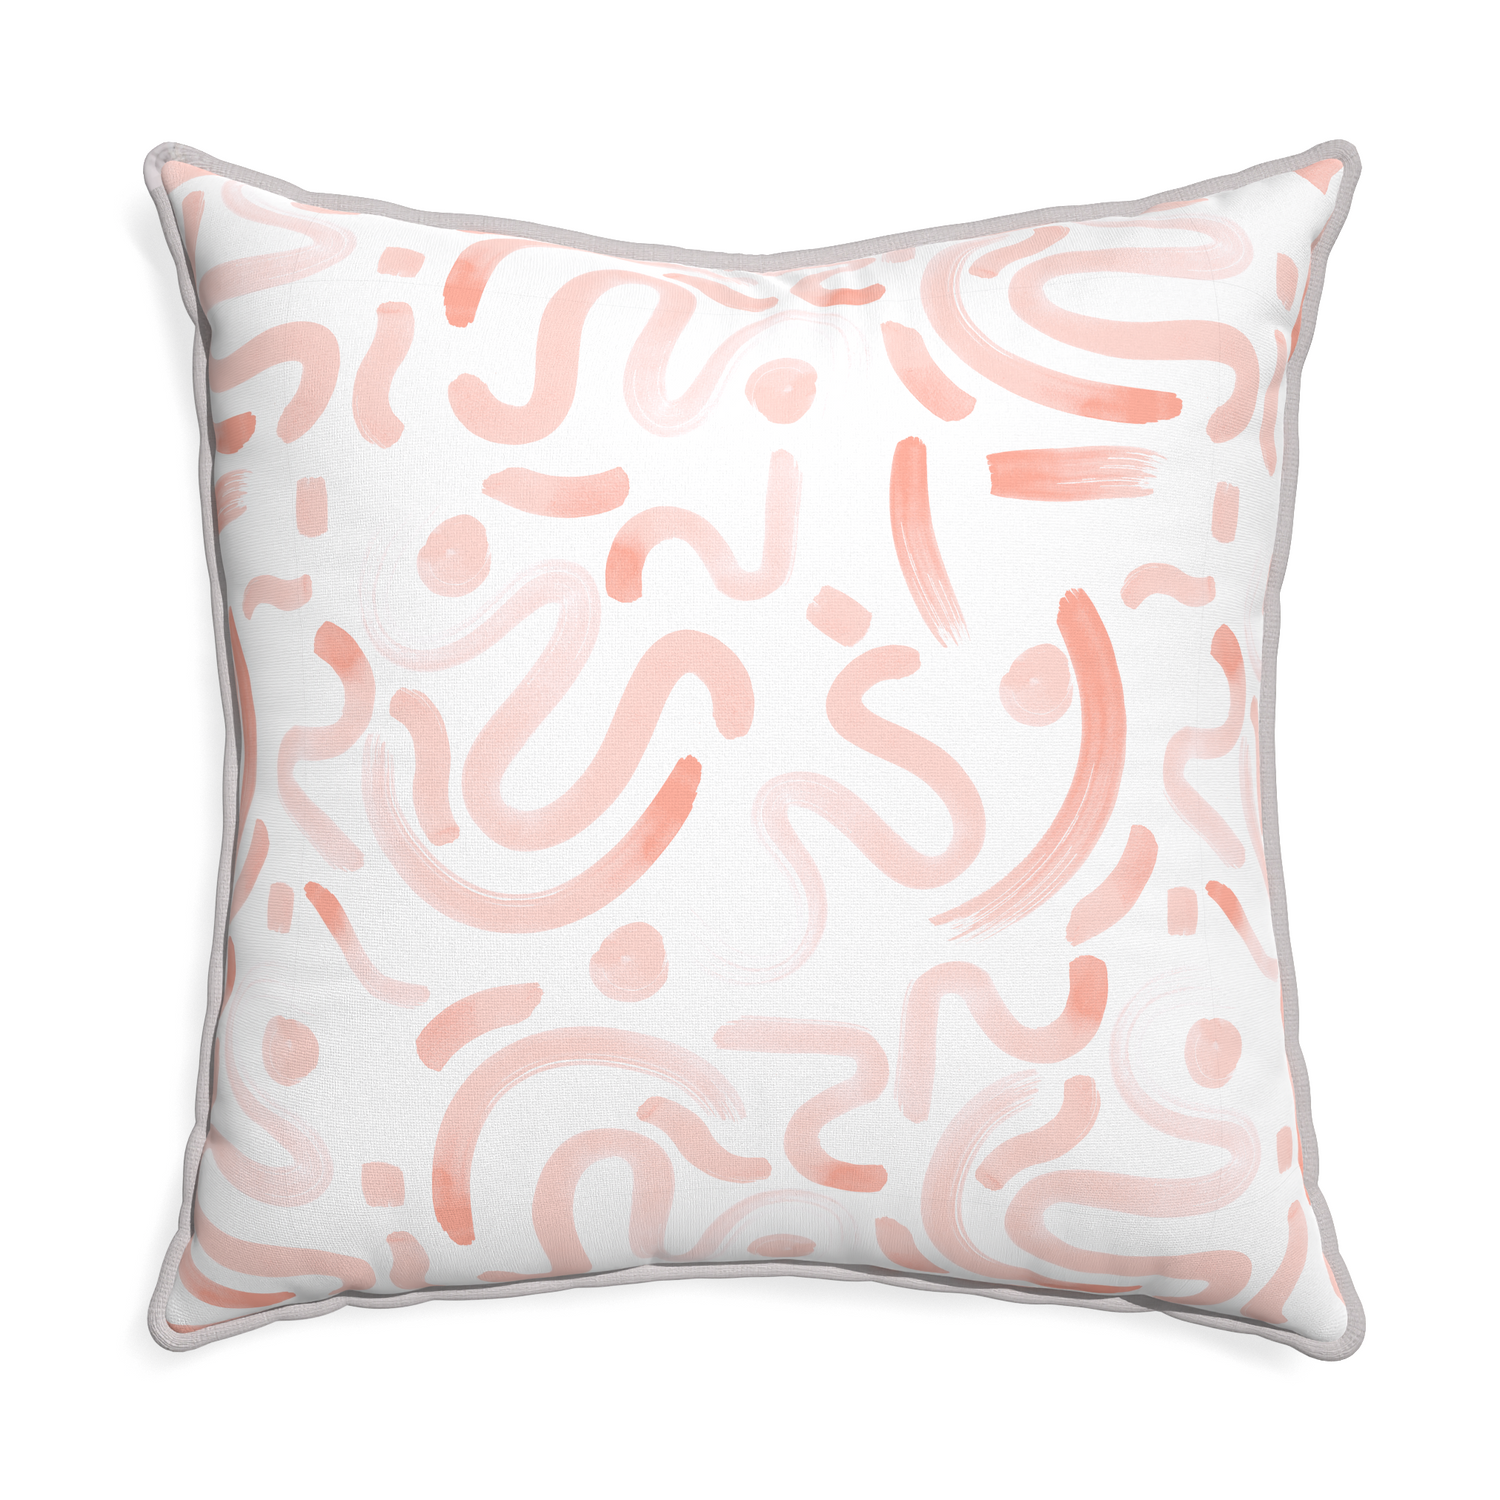 Euro-sham hockney pink custom pillow with pebble piping on white background